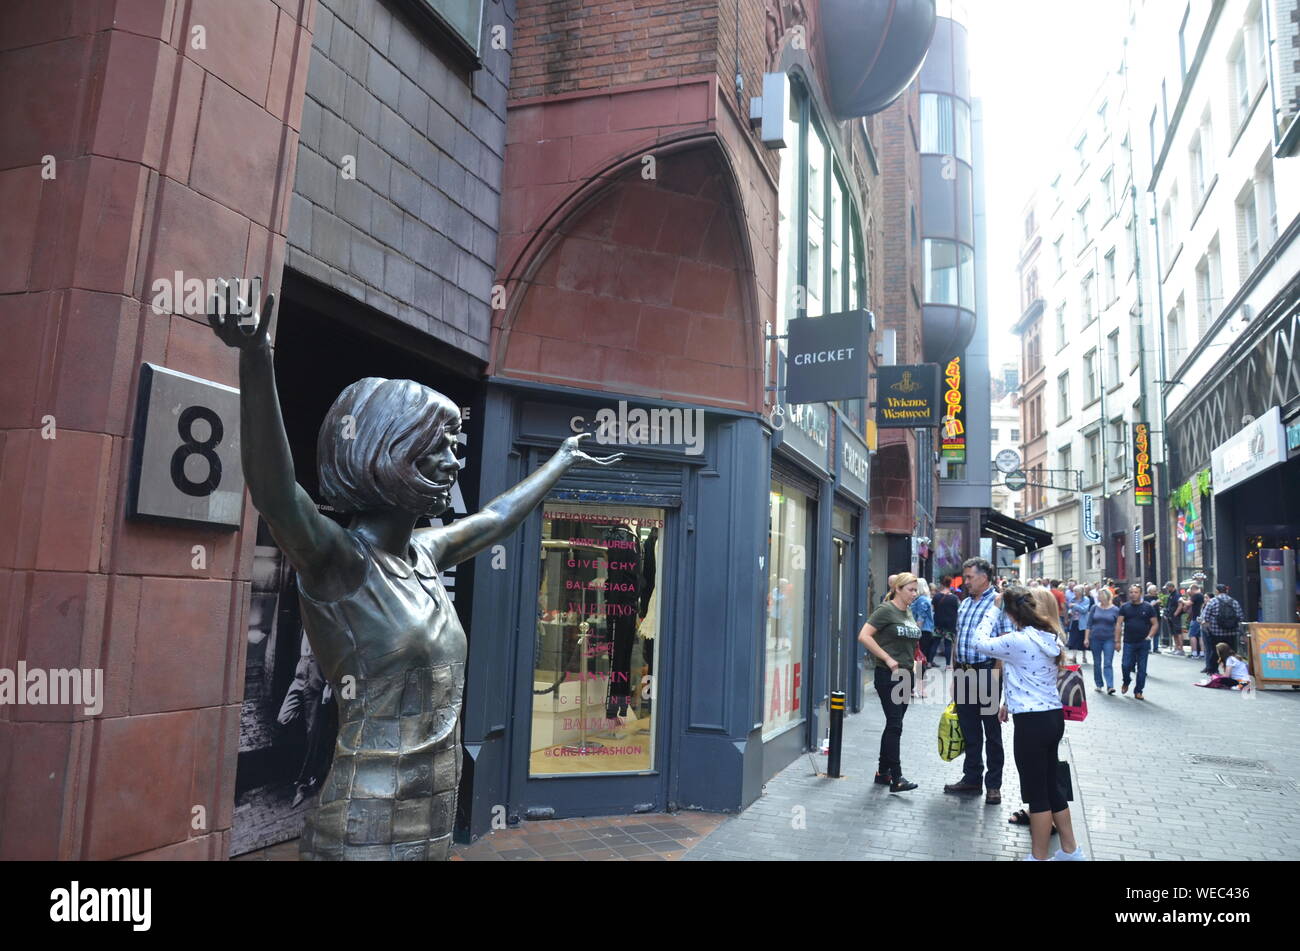 Statue of Cilla Black on Mathew Street in Liverpool, England, UK outside the entrance to the original Cavern Club where The Beatles played. Stock Photo